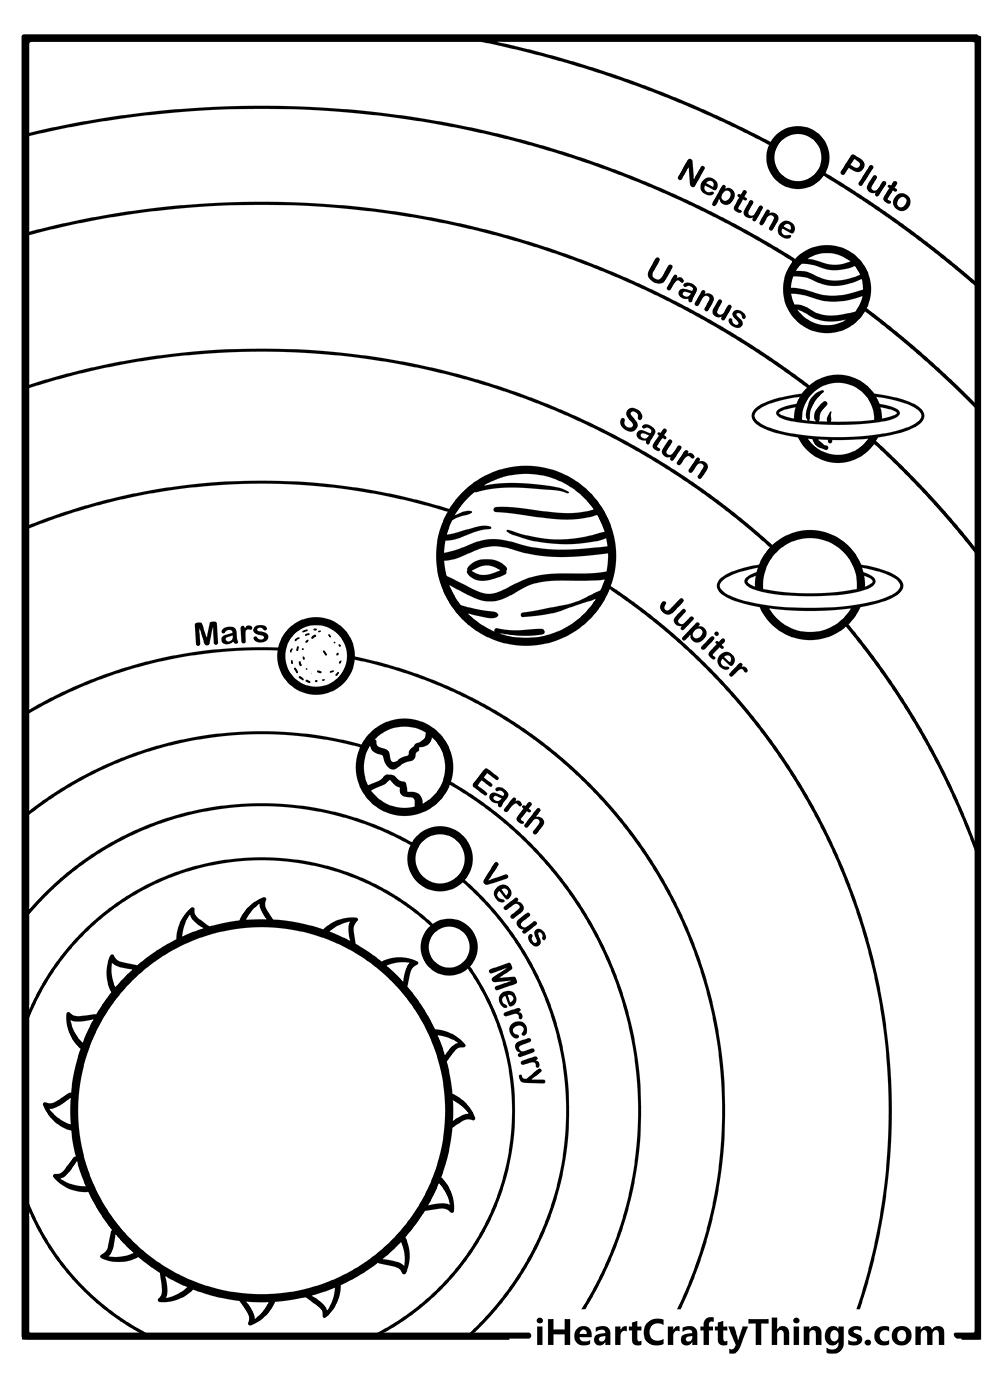 planet-mercury-coloring-pages-coloring-home